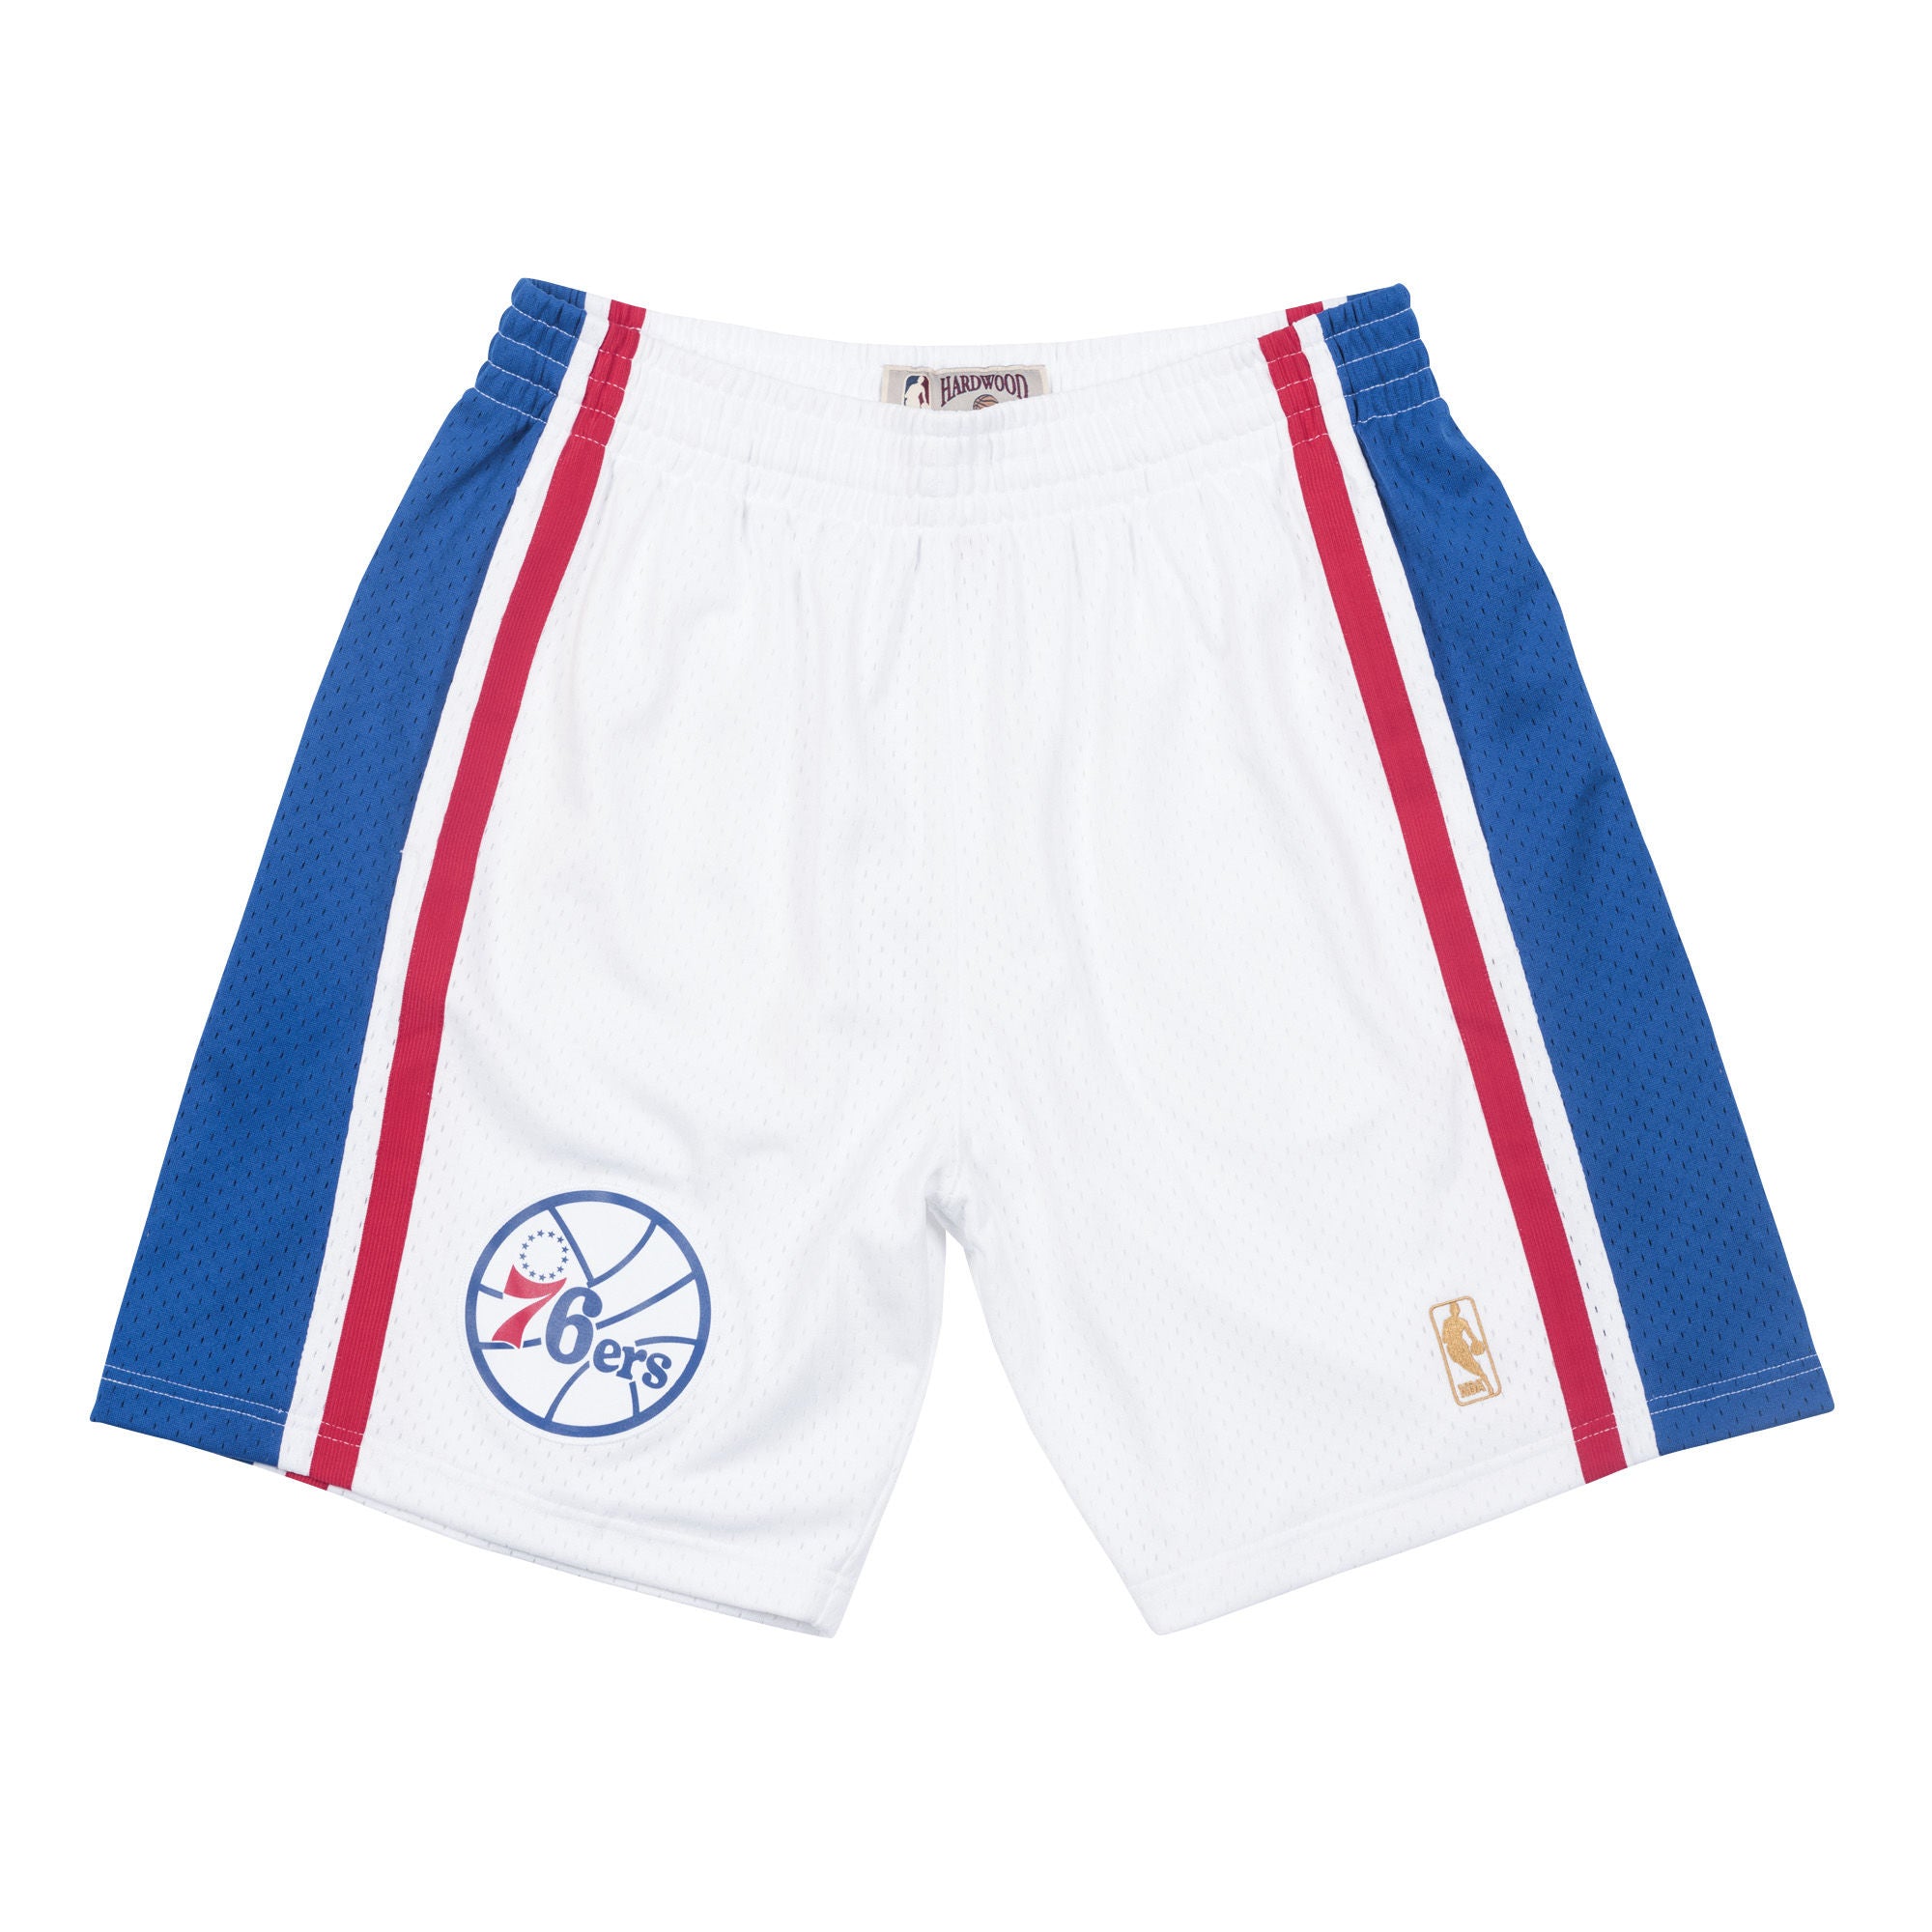 NEW with Tags ~ 76ers Mitchell & Ness Shorts 2000-01 SIZE XL Hardwood  Classics